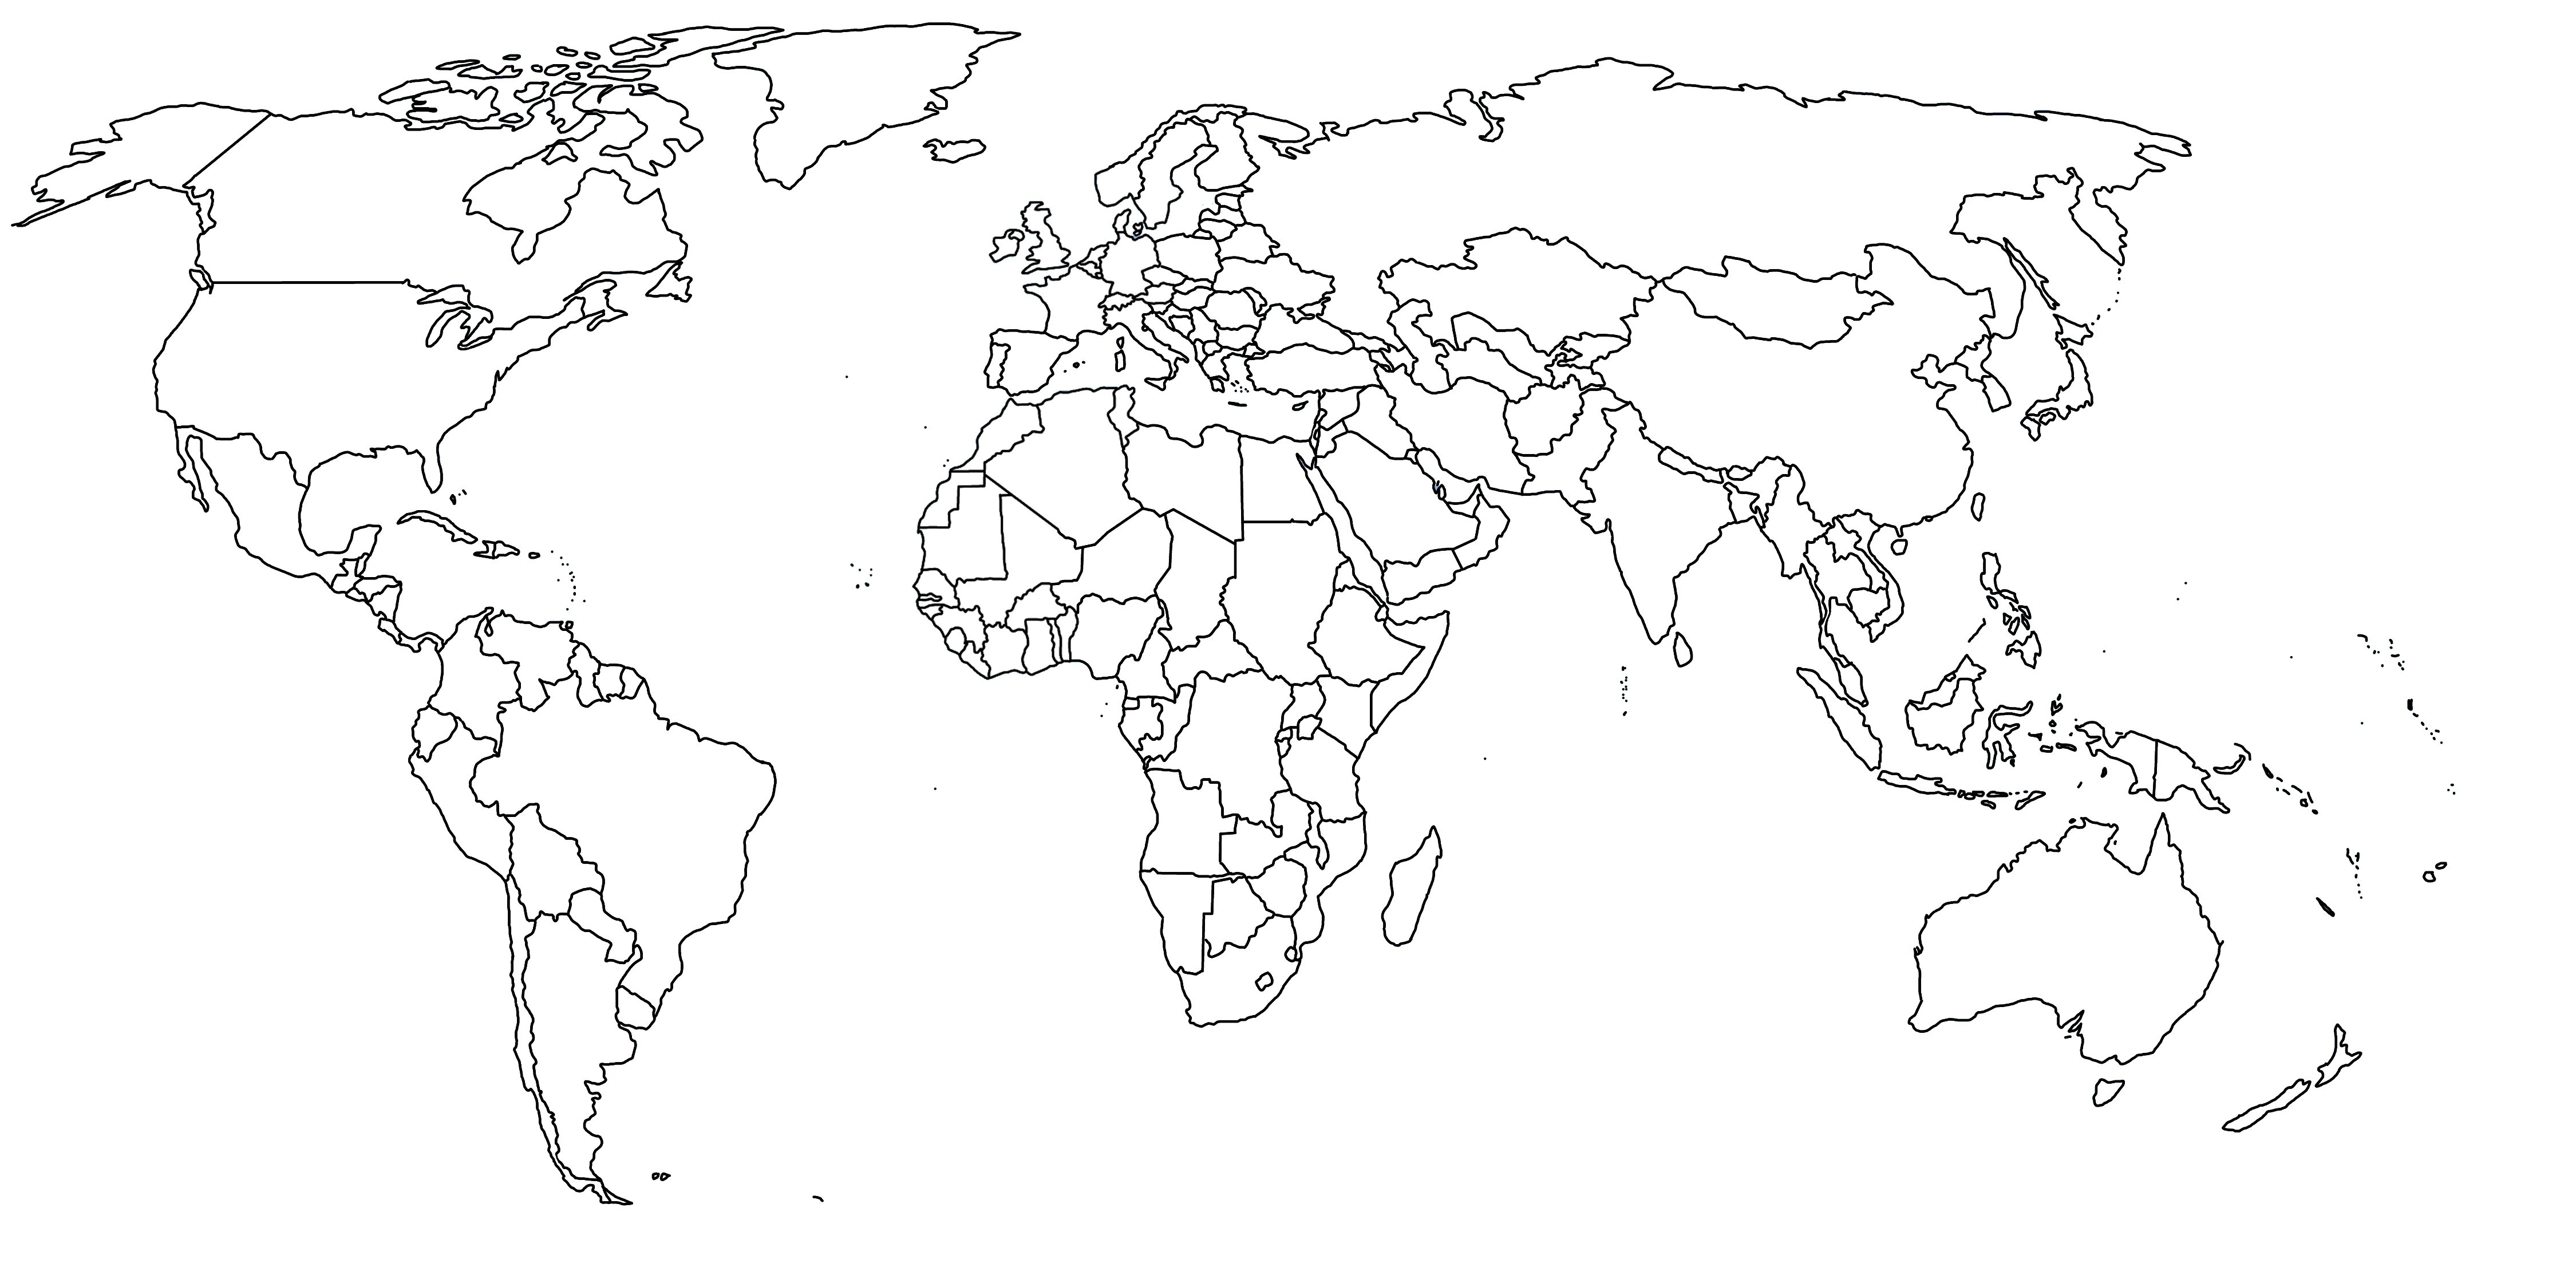 World Map Without Labels,World Map With Black And White Outline